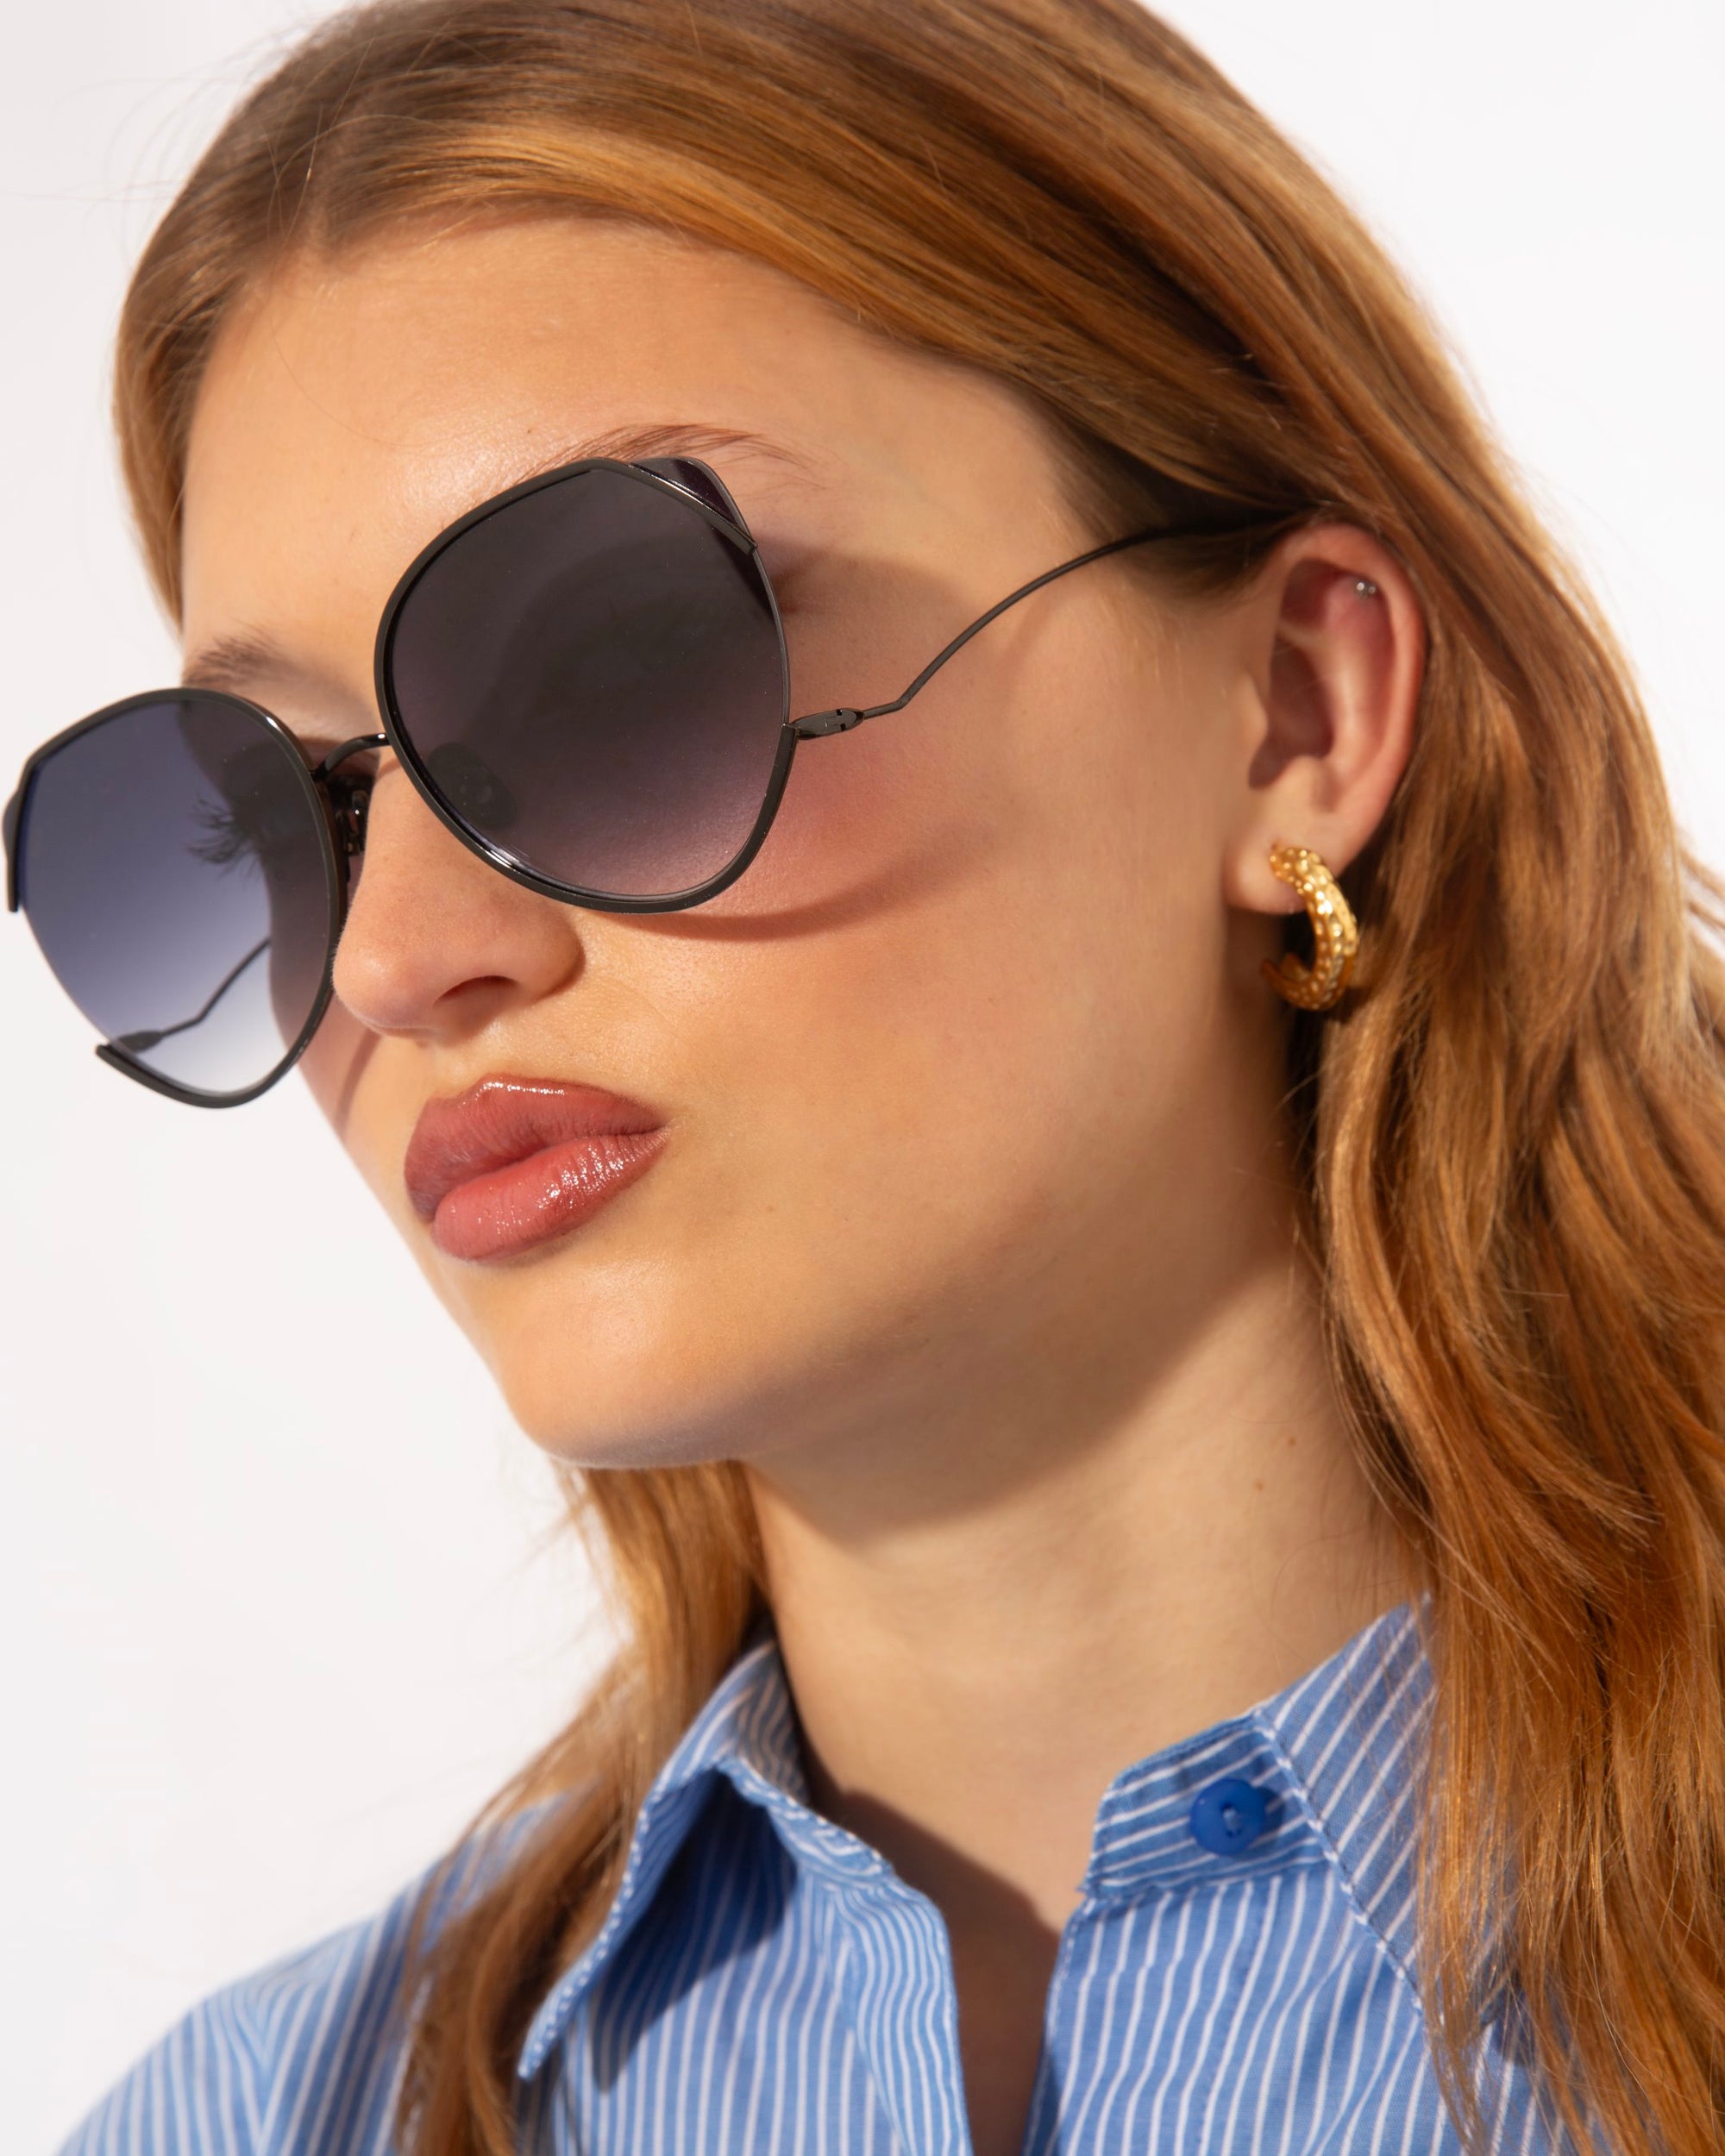 A person with long, light brown hair wears large, round For Art&#39;s Sake® Wonderland sunglasses with jadestone nosepads and UV protection. They sport a blue striped shirt with the top button undone and gold hoop earrings, looking to their left against a plain background.